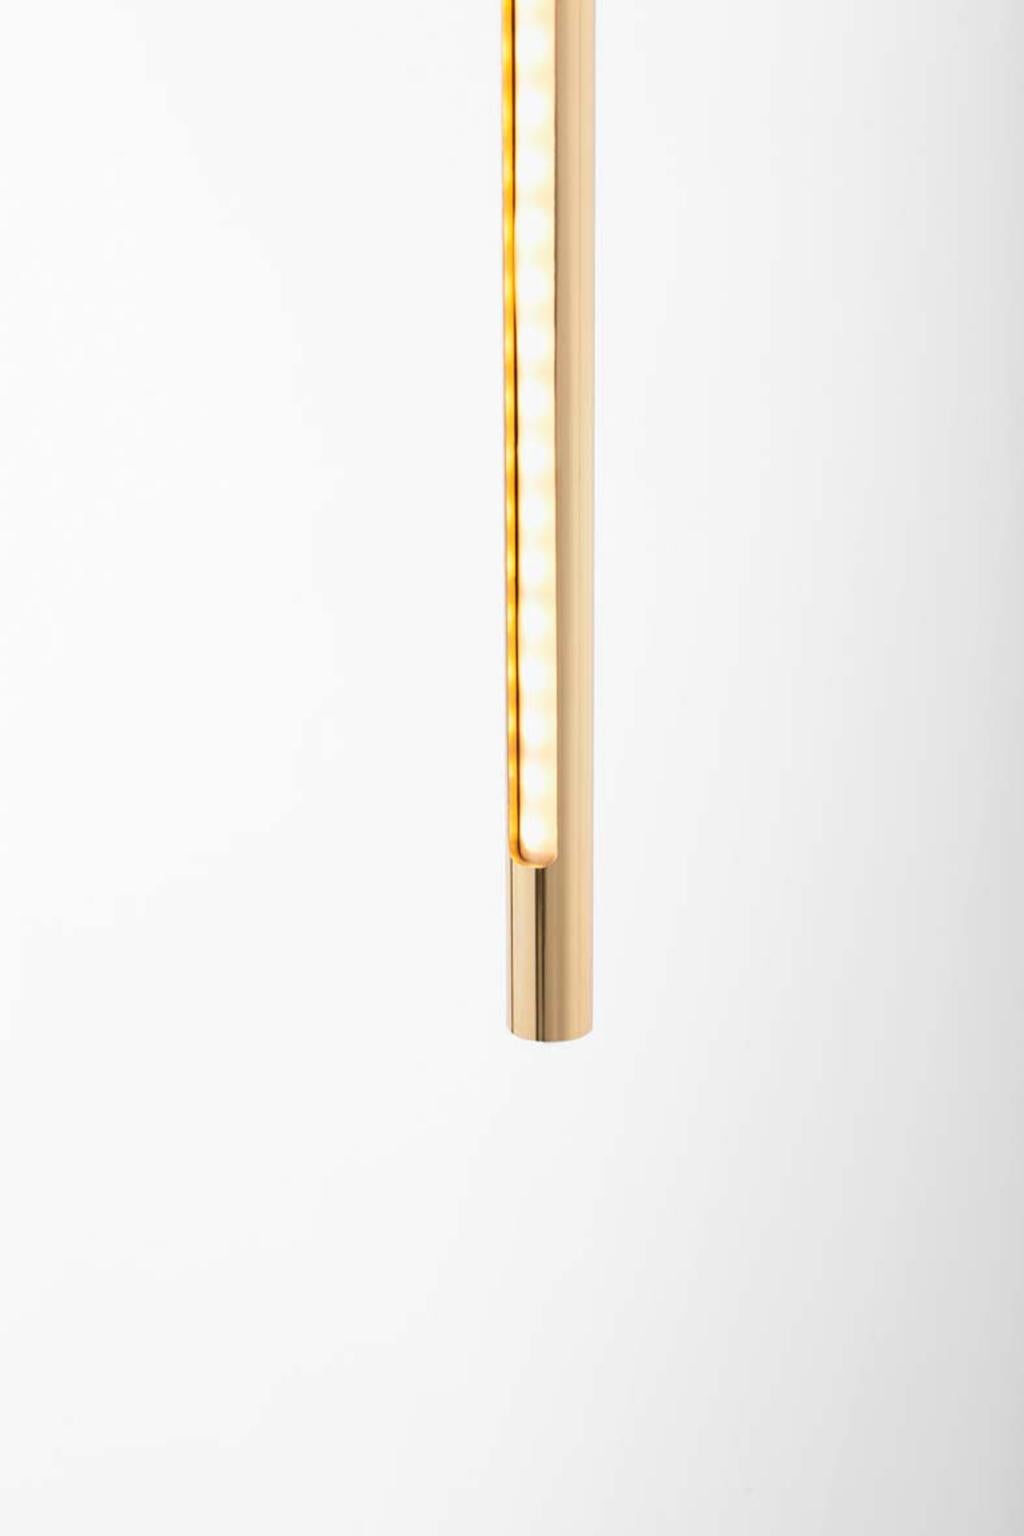 Italian Gold Contemporary Ceiling Lamp in Tubular Brass, LED Lamp Type For Sale